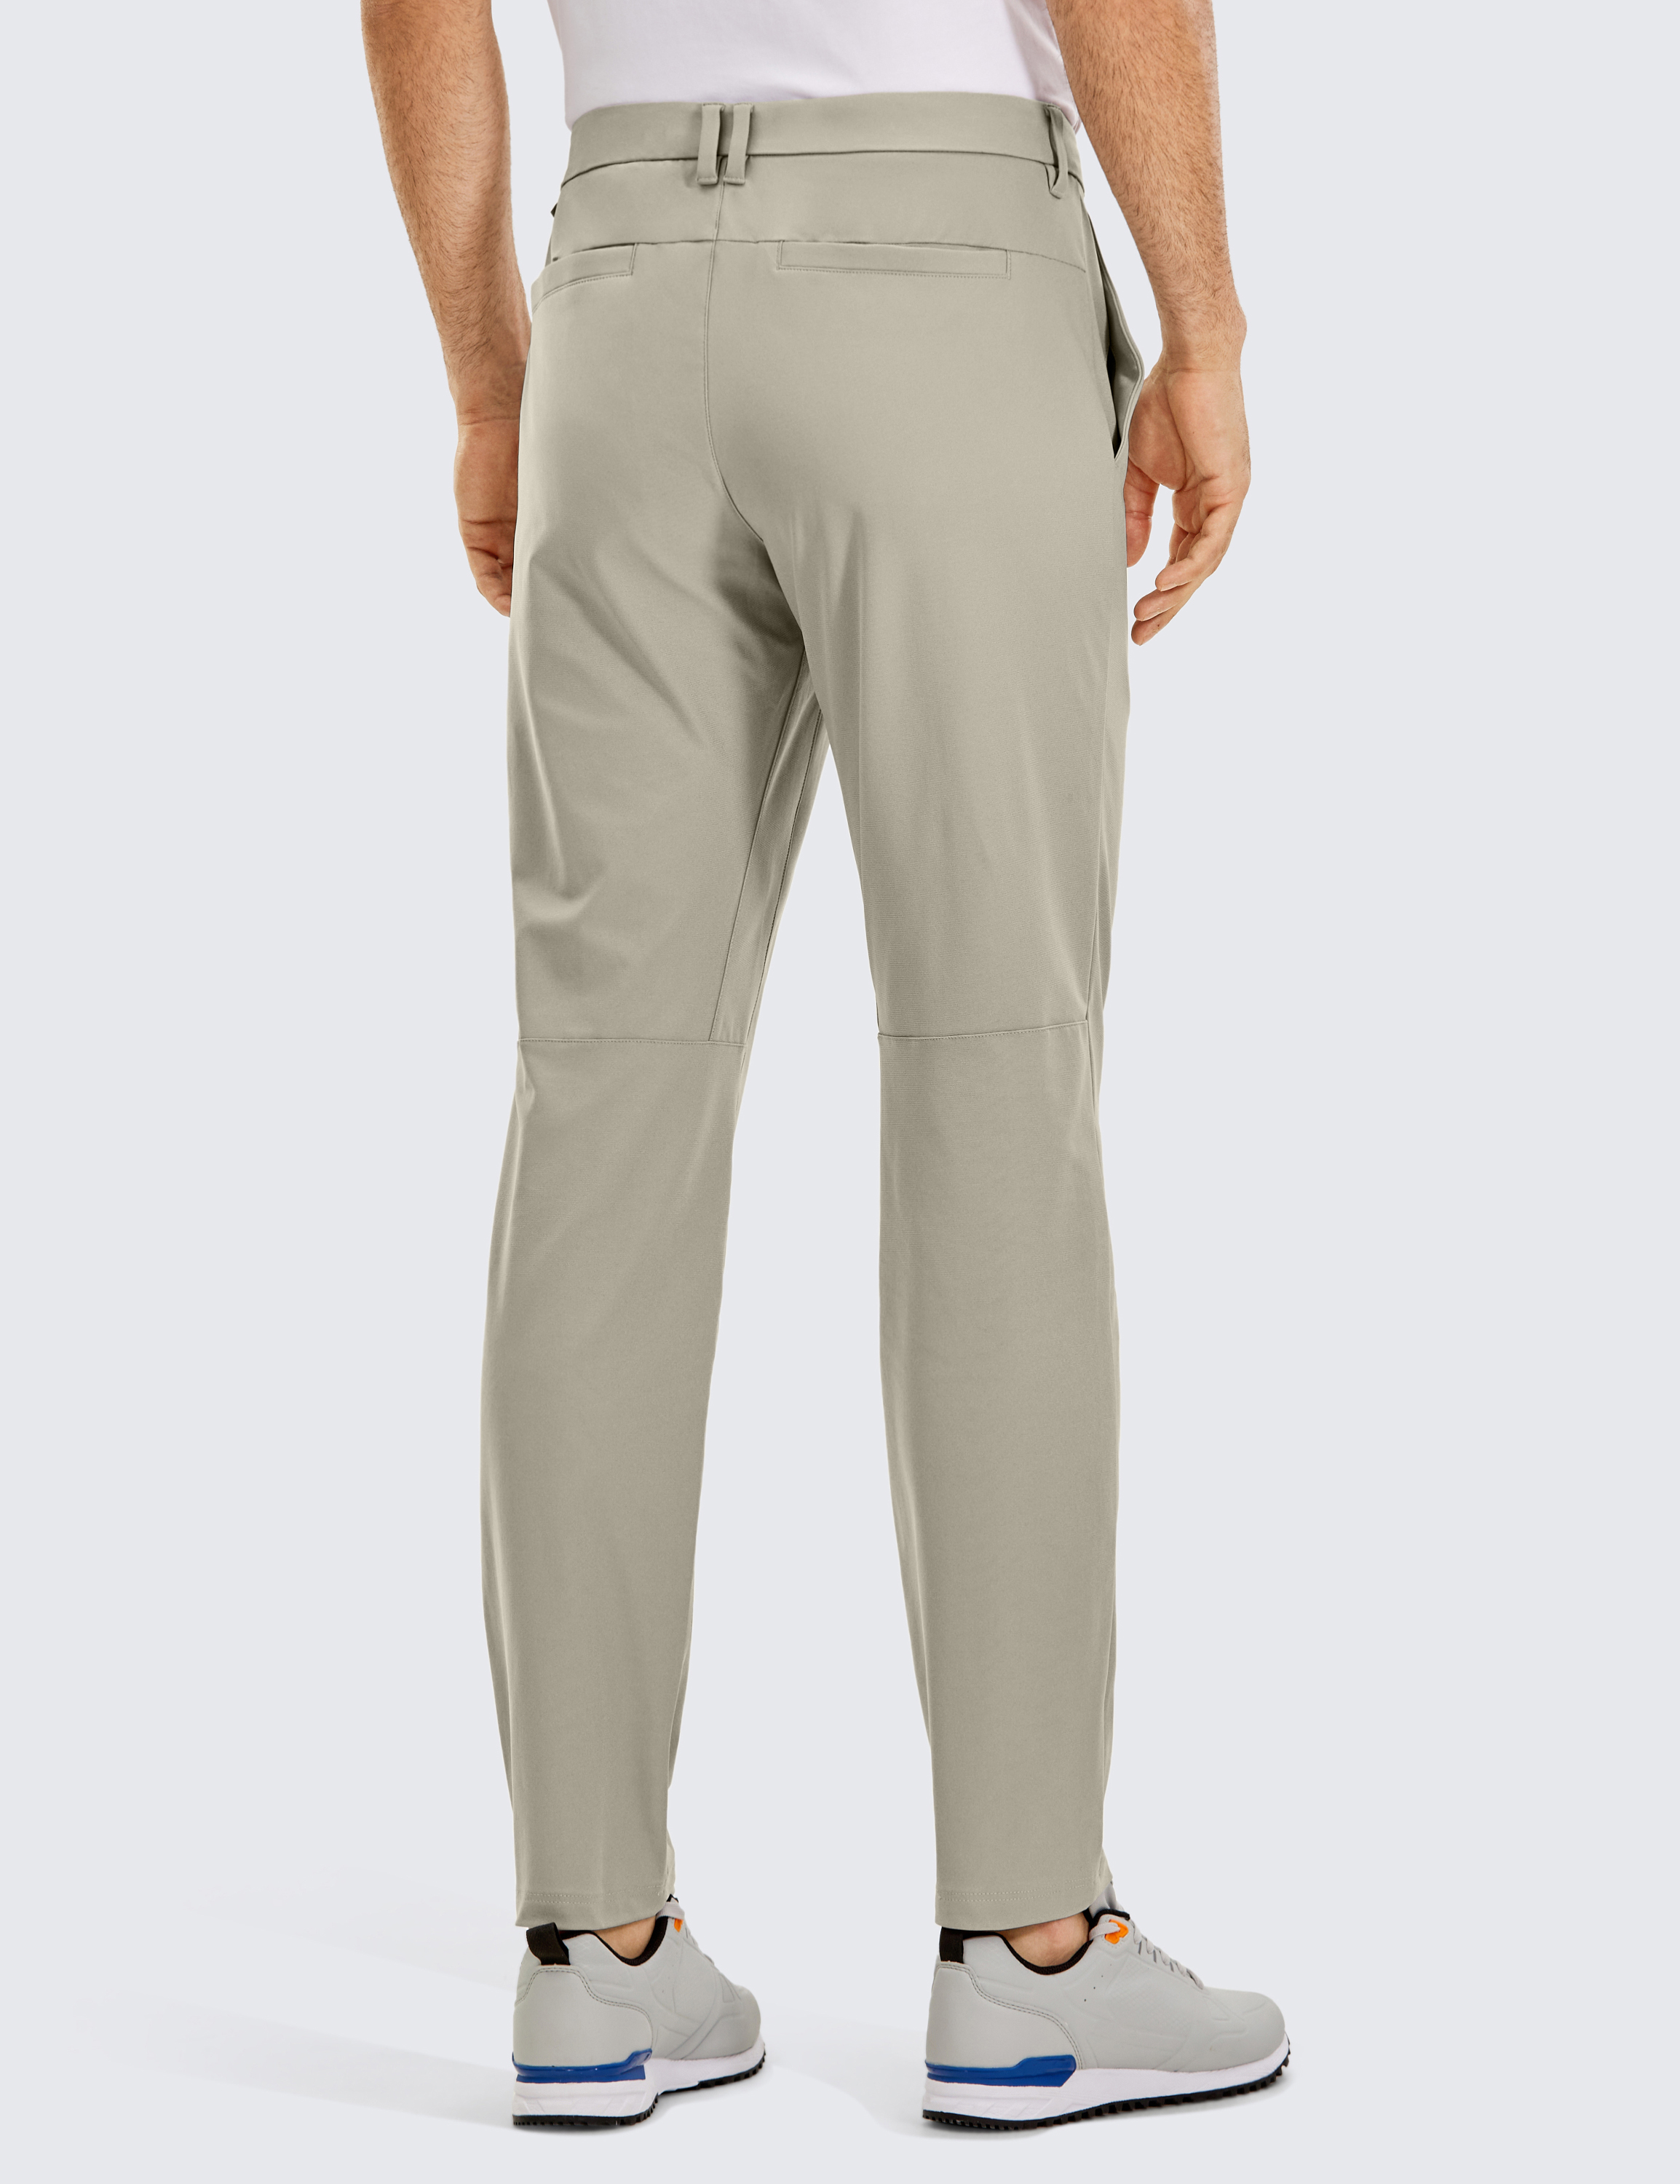 CRZ YOGA All-Day Comfy Classic-Fit Men's 34 Inches Golf Pants with Pockets